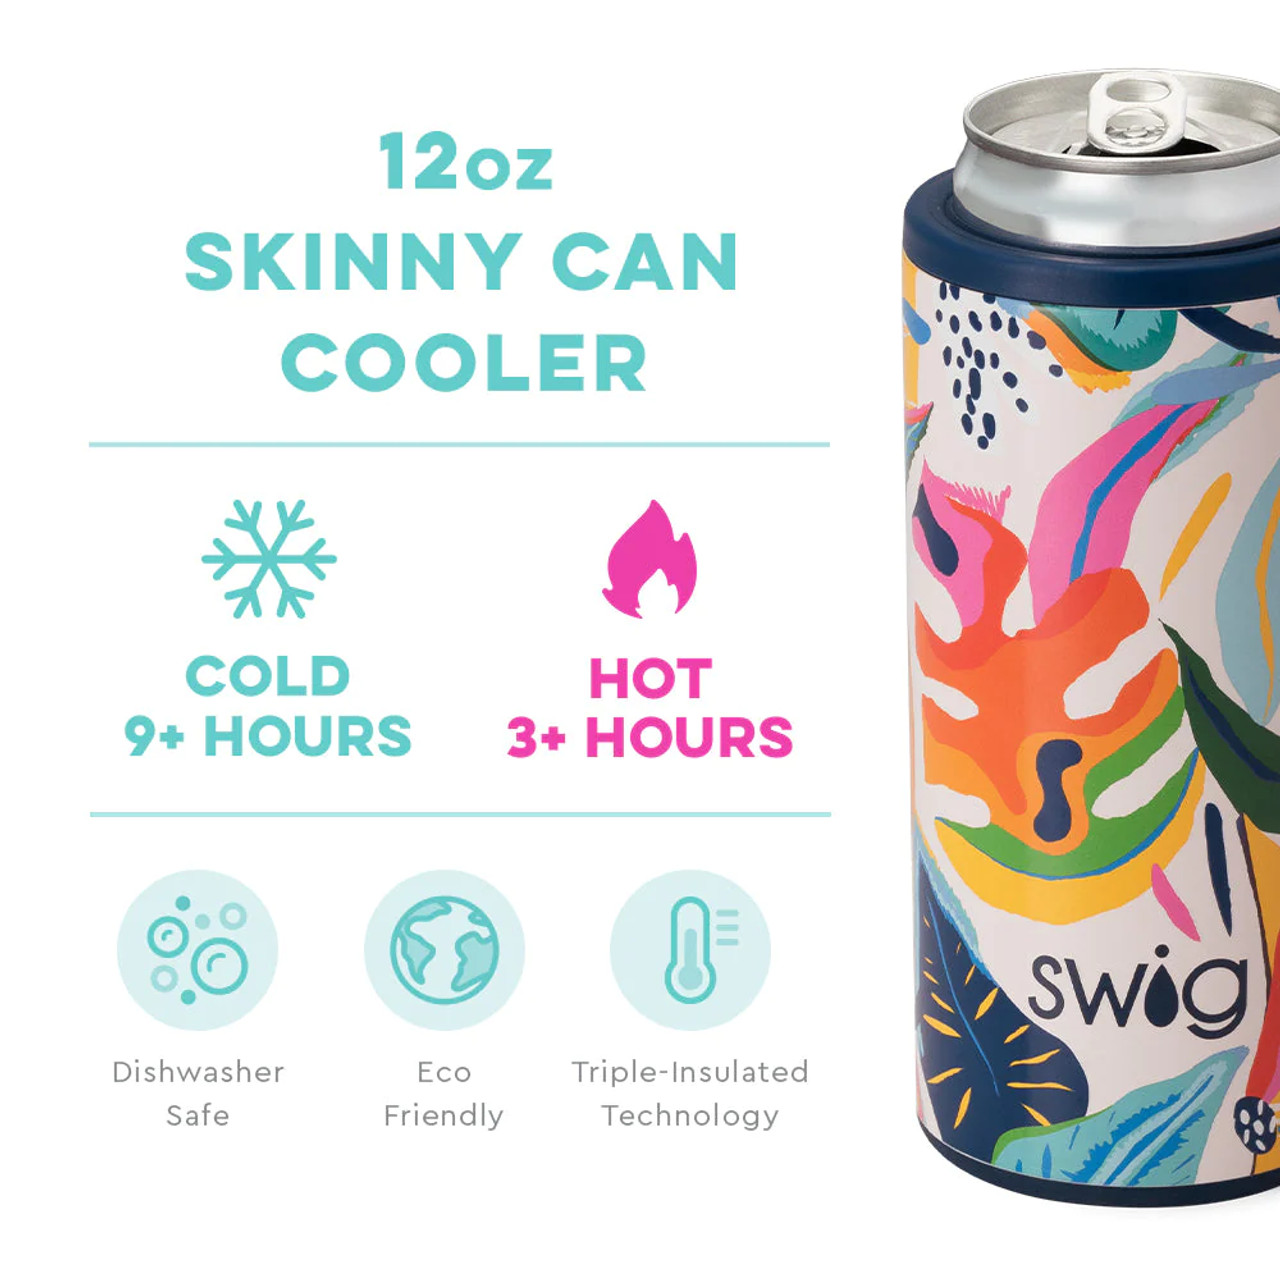 https://cdn11.bigcommerce.com/s-e3nb6xi/images/stencil/1280x1280/products/25249/126946/swig-life-signature-12oz-insulated-stainless-steel-skinny-can-cooler-calypso-temp-info__63631.1689104476.jpg?c=2